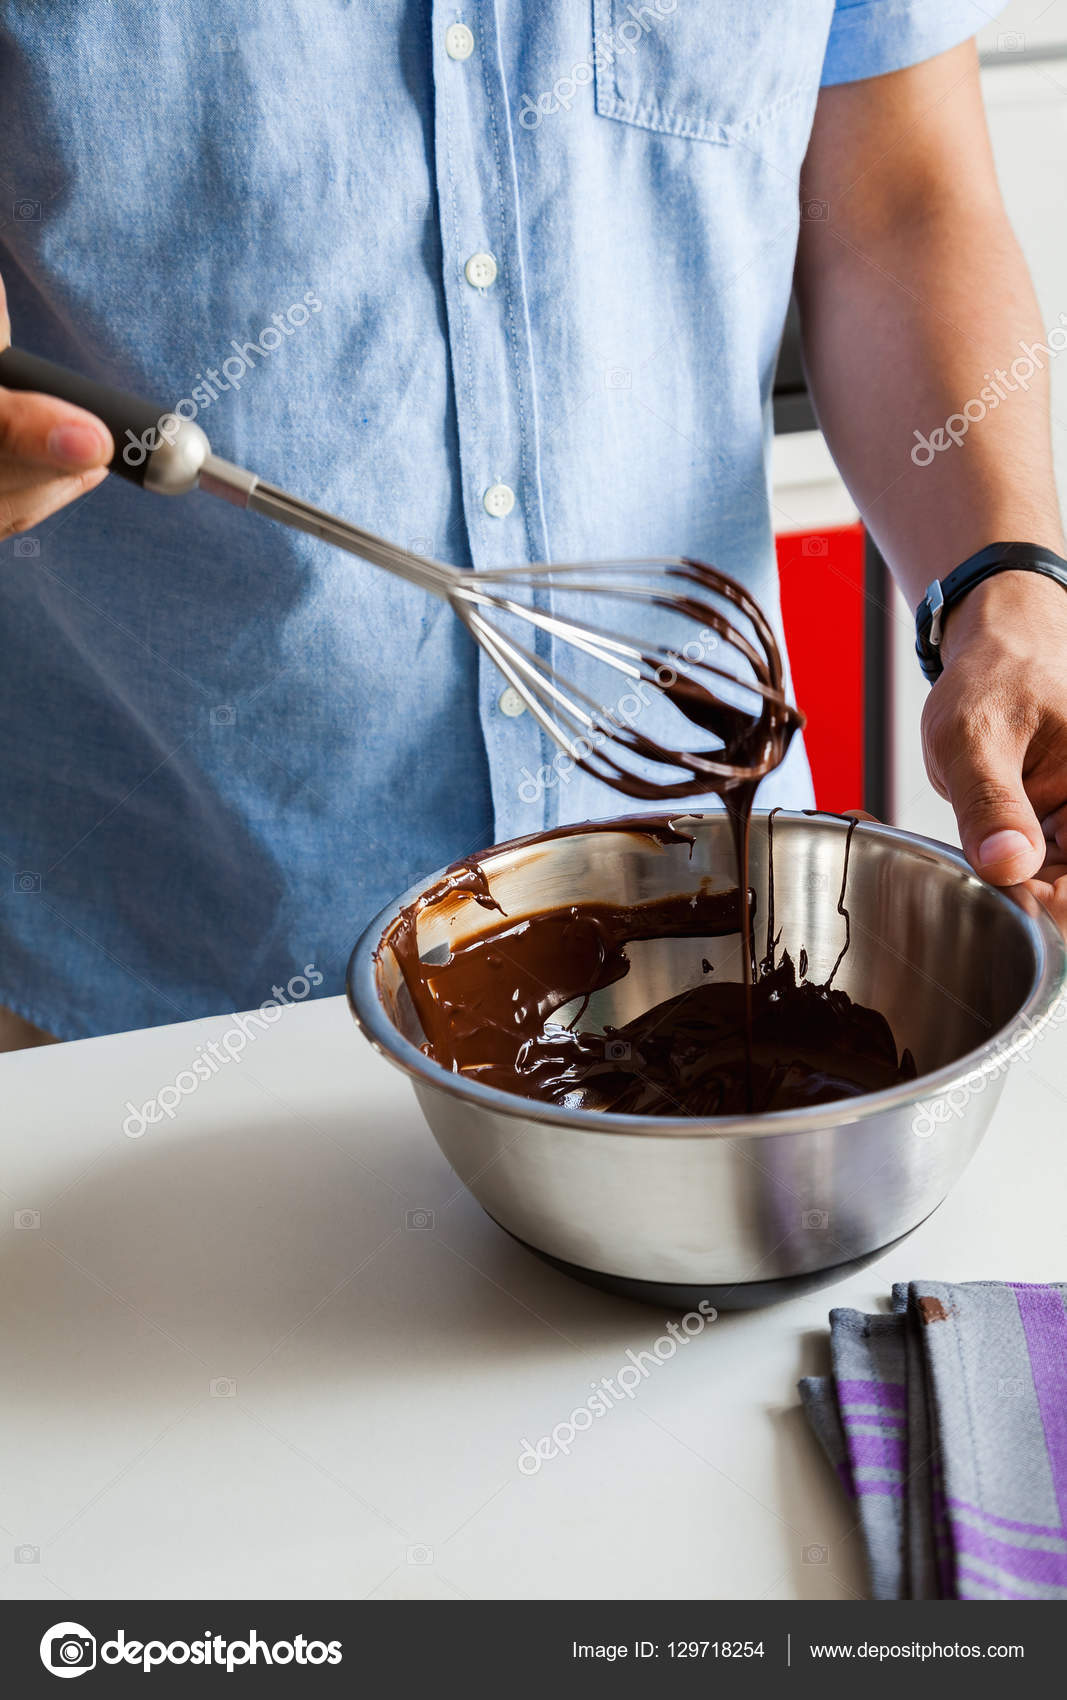 Tempering Delicious Chocolate Stock Photo by ©NatashaPhoto 129720616